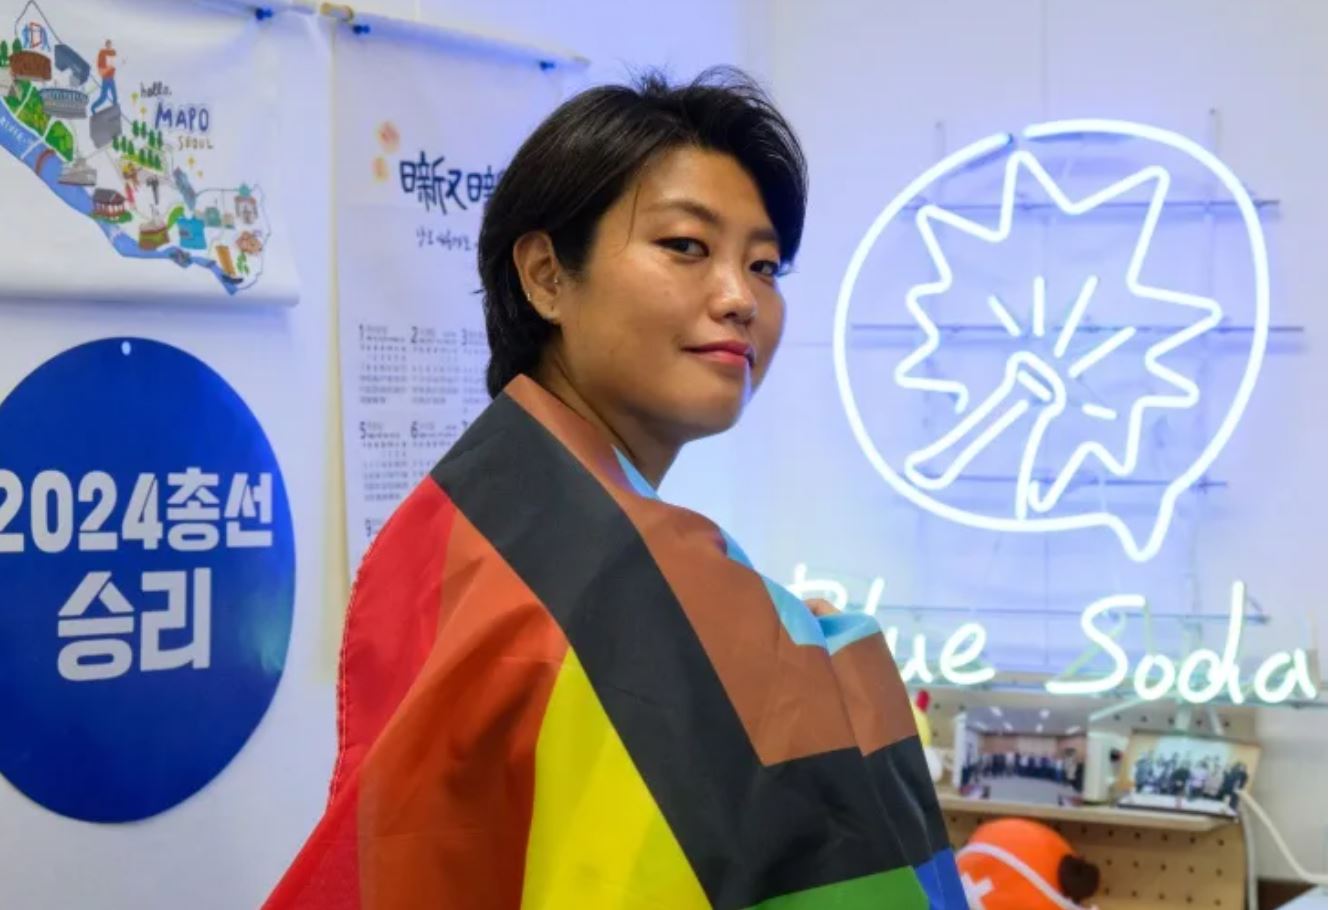 'We Exist': South Korea's First LGBTQ Councillor Advocates for Inclusion